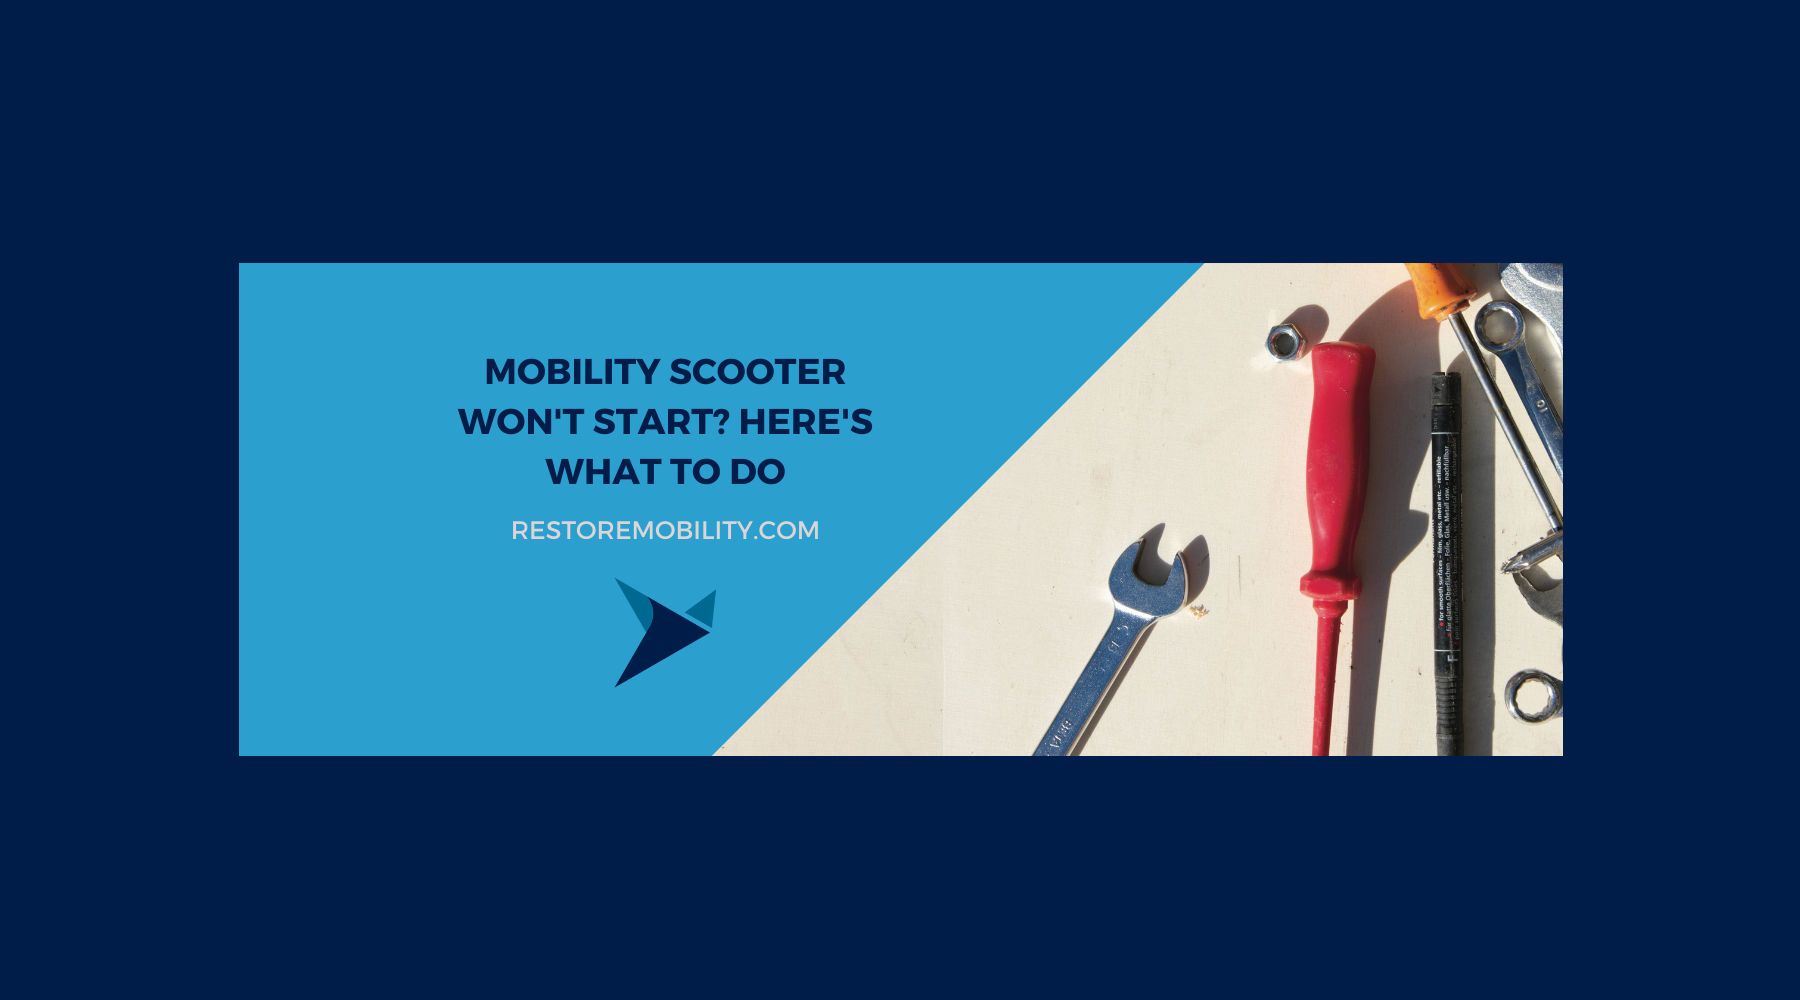 Mobility Scooter Won't Start? Here's What to Do